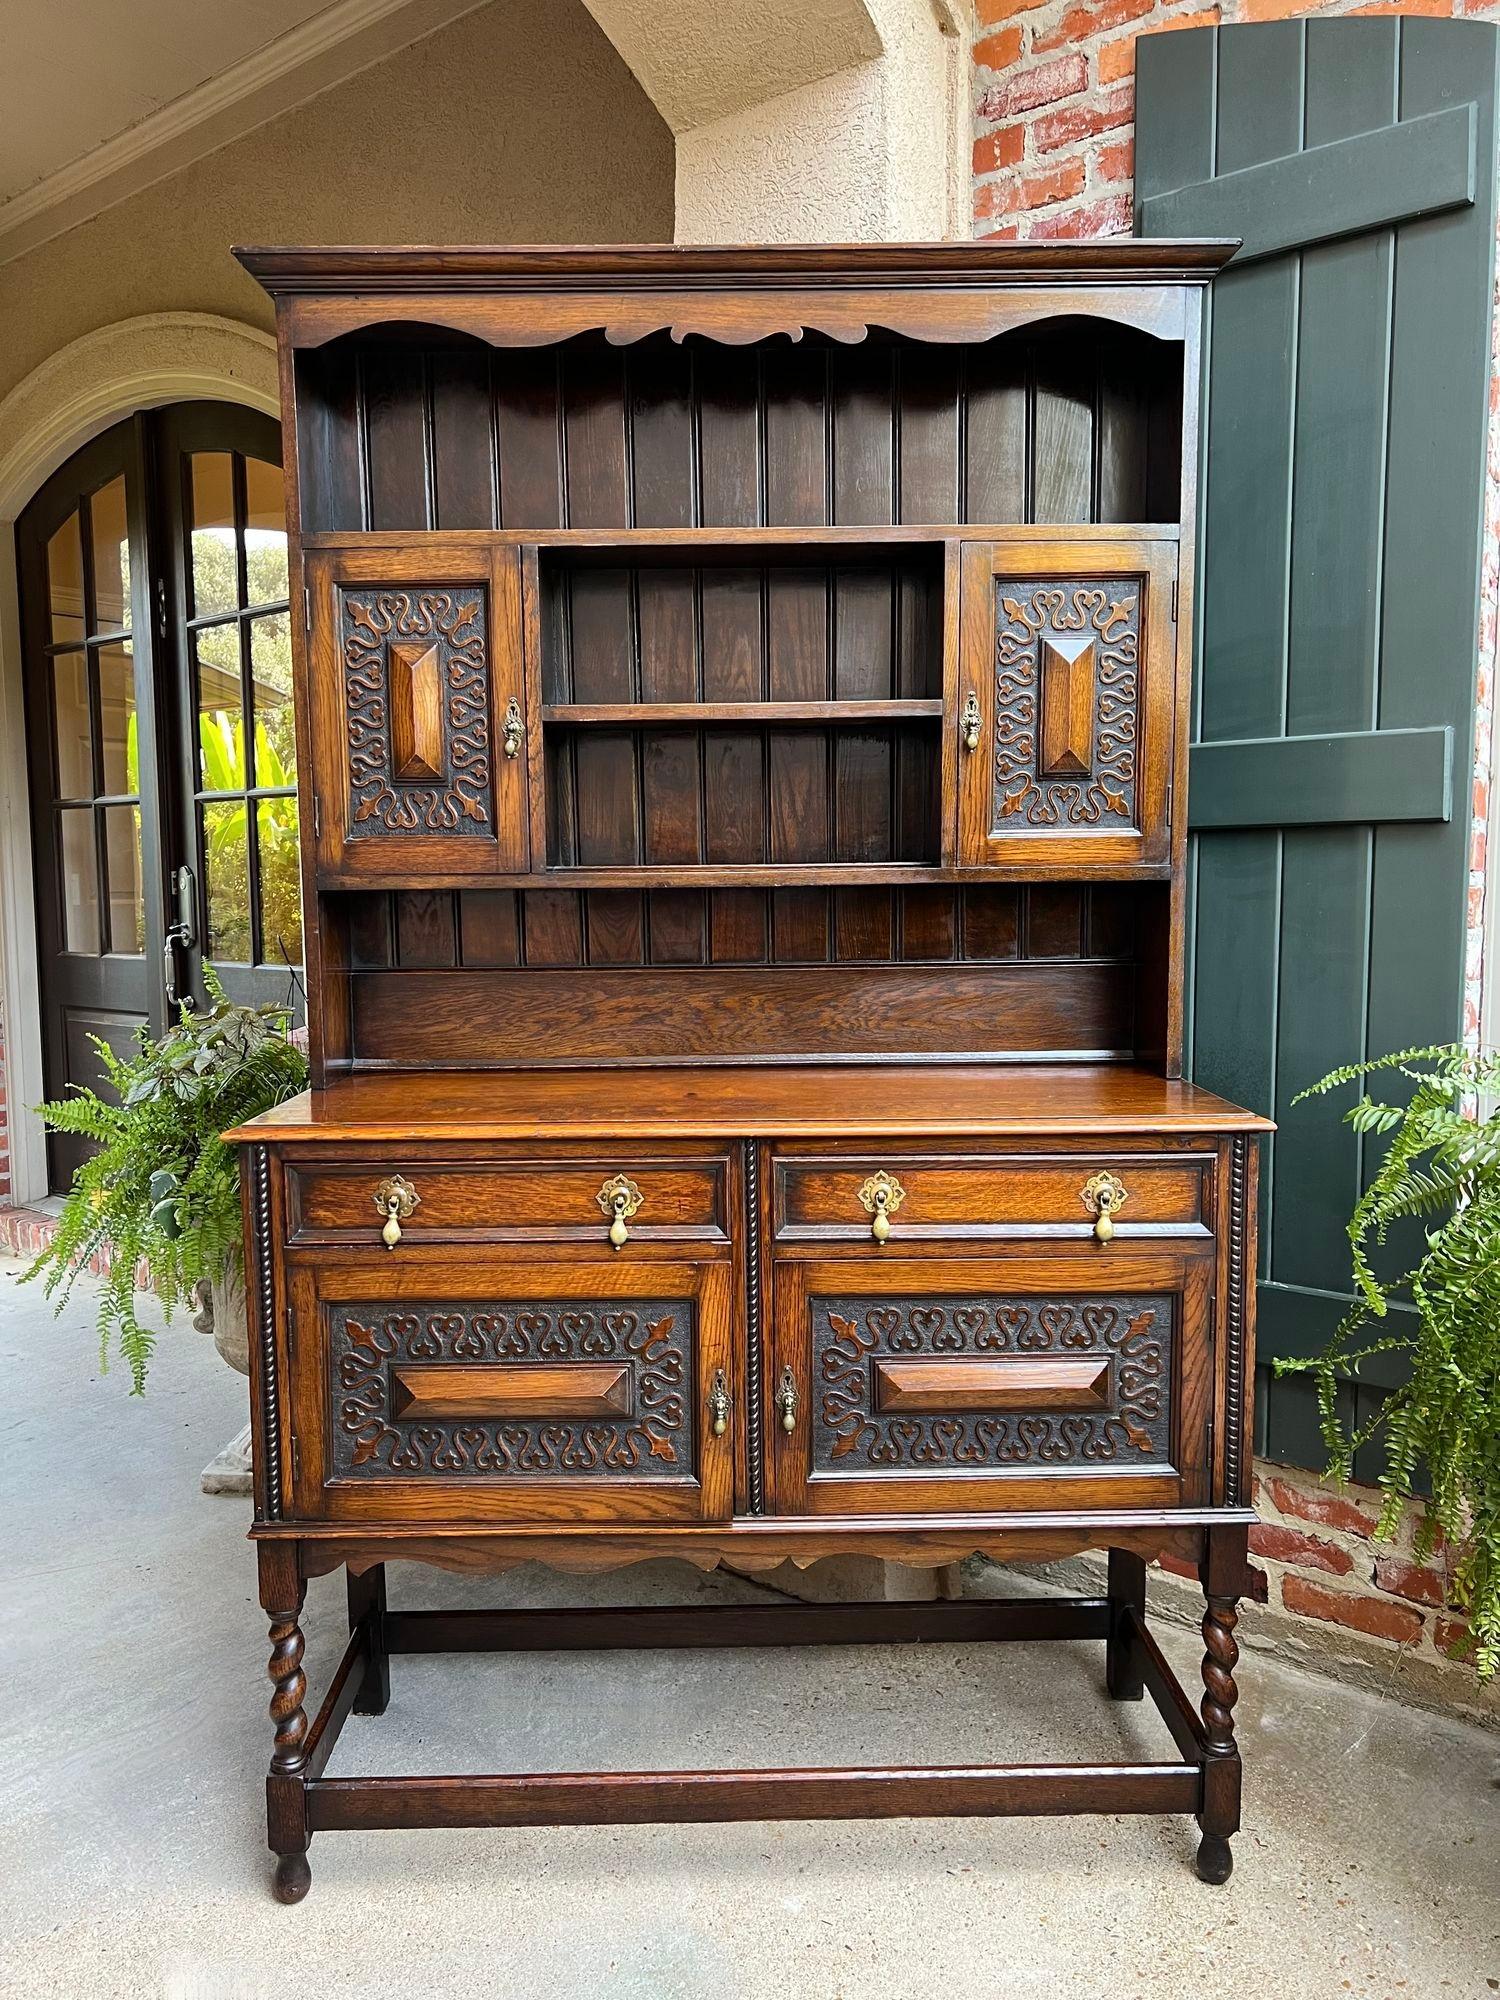 Antique English Welsh Dresser Sideboard Hutch BARLEY TWIST Jacobean Farmhouse.

Direct from England, part of our latest shipment of fabulous antique British furniture that also included farm tables, leaded glass door bookcases, draw leaf tables and